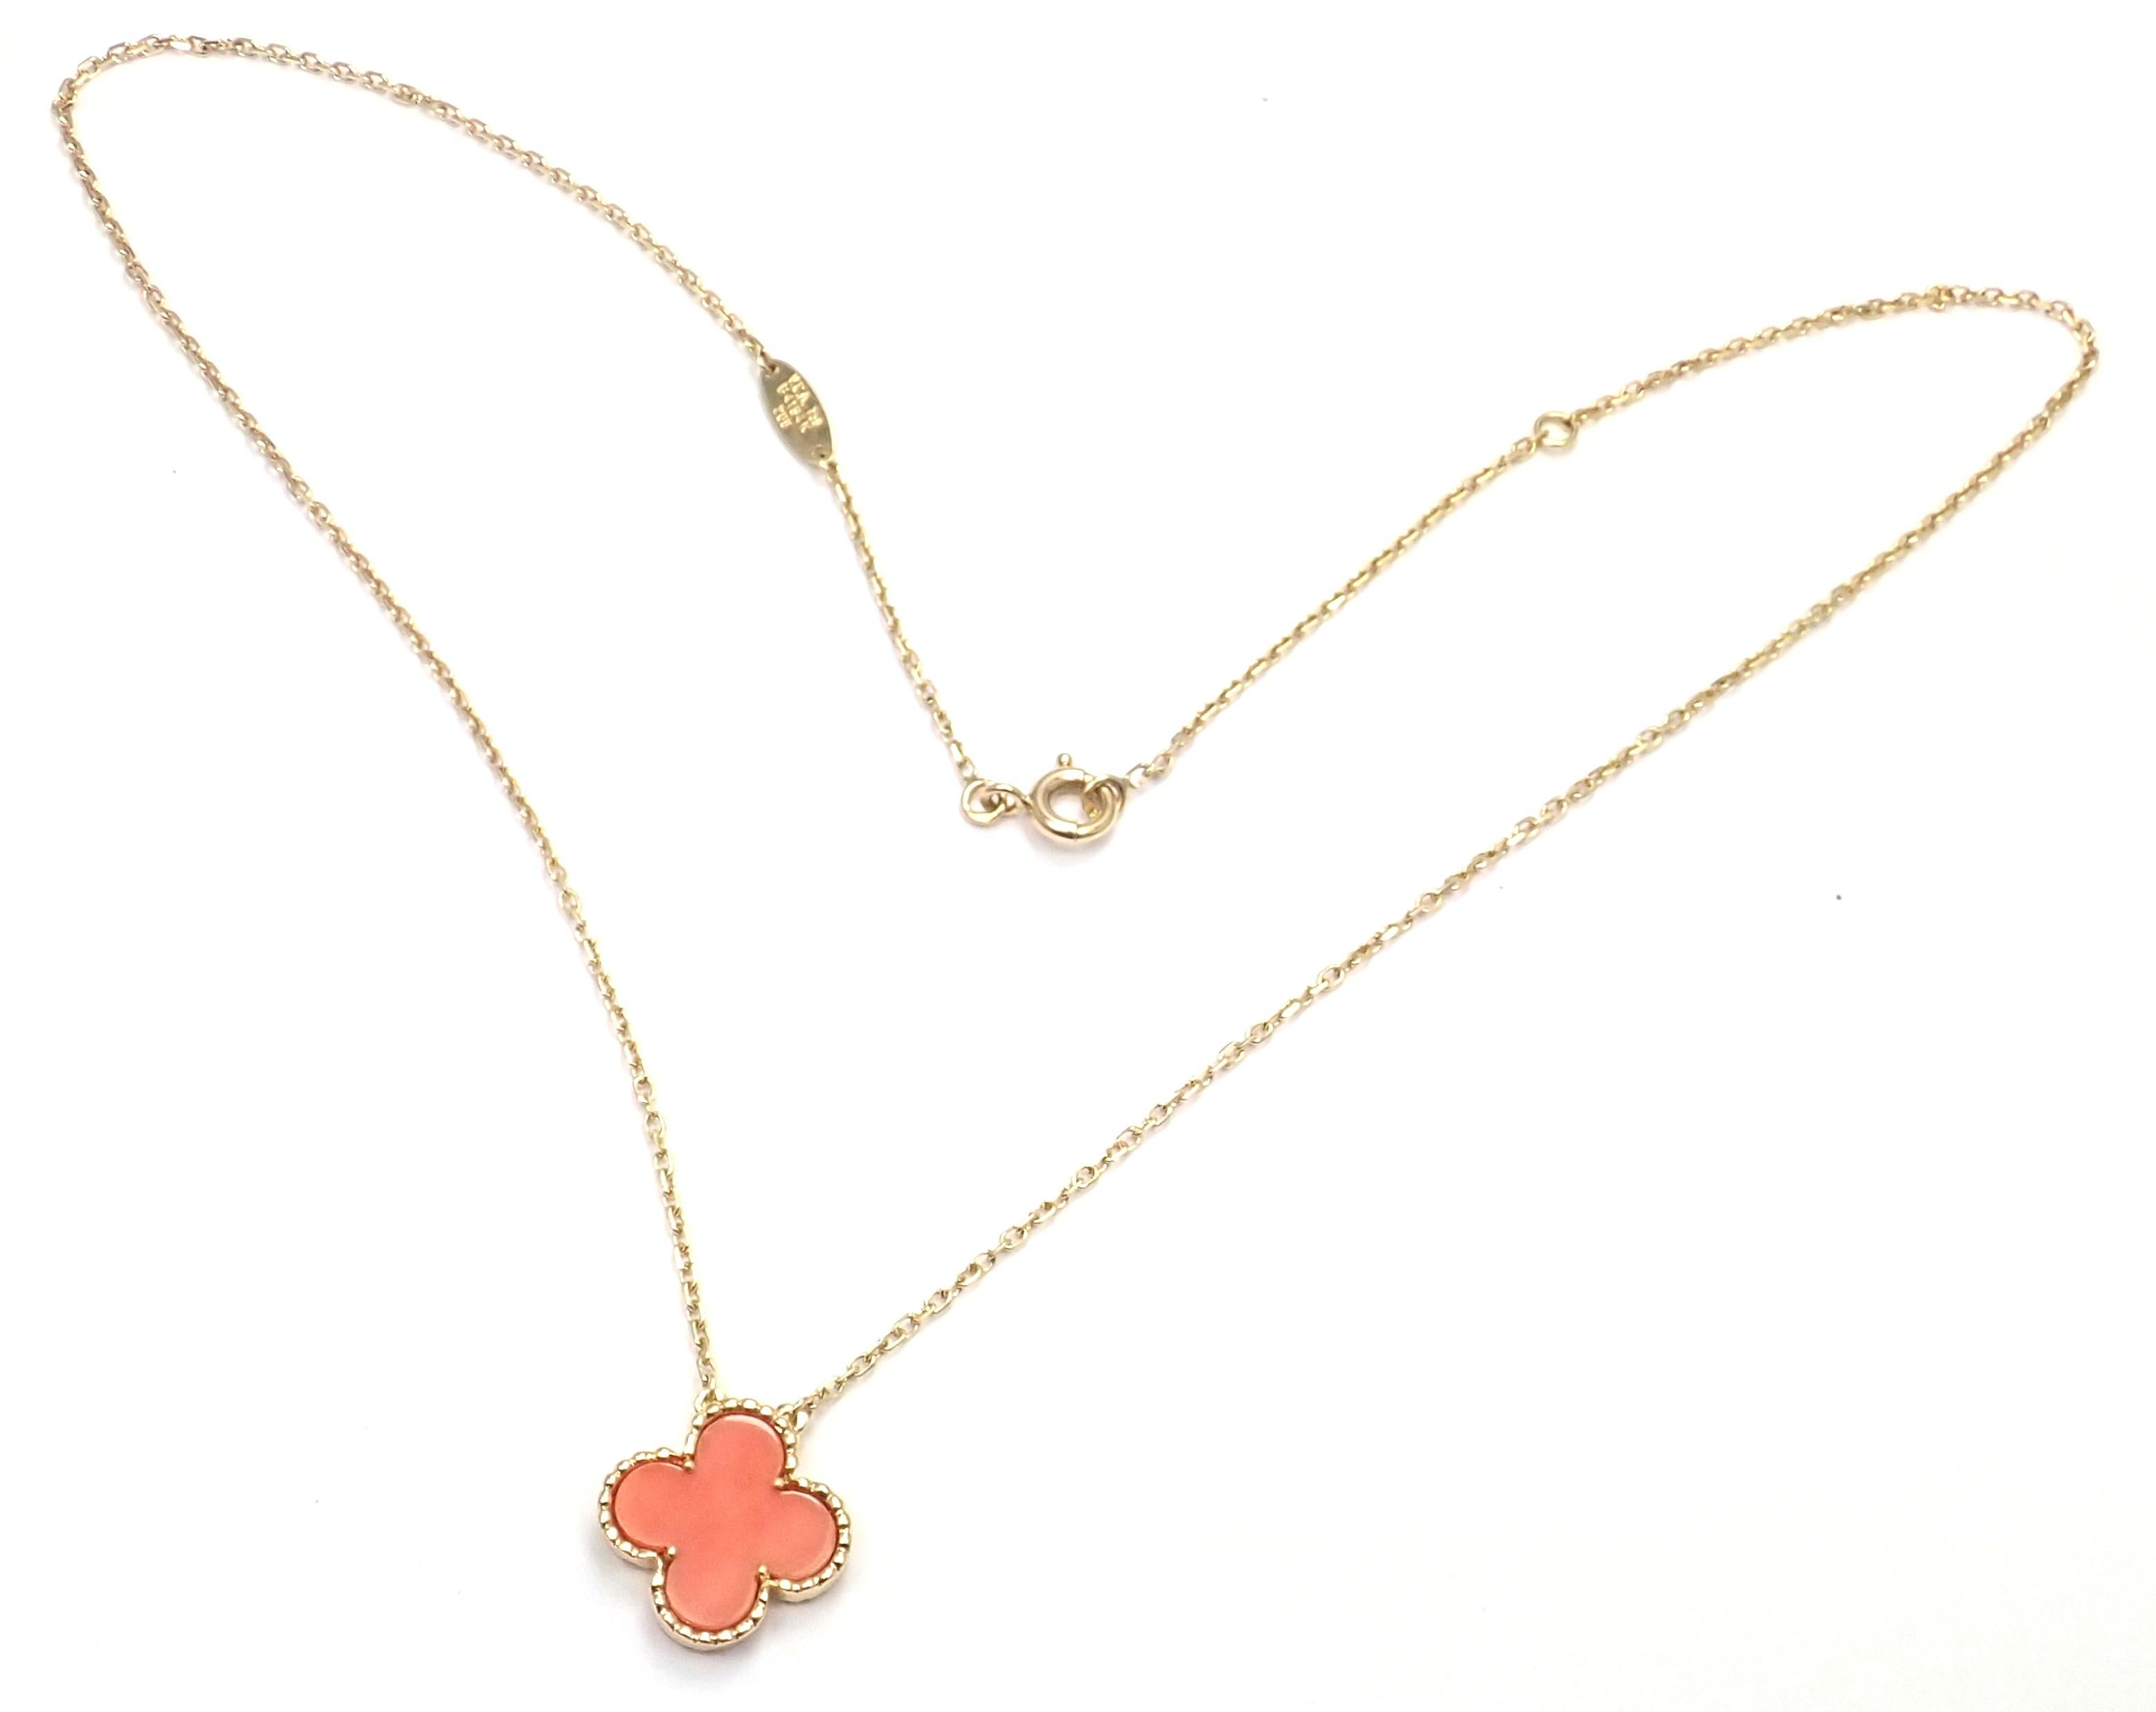 18k Yellow Gold Vintage Coral Alhambra Pendant Necklace by Van Cleef & Arpels.
With Alhambra cut coral stone.
Details: 
Measurements: Length: 16.5